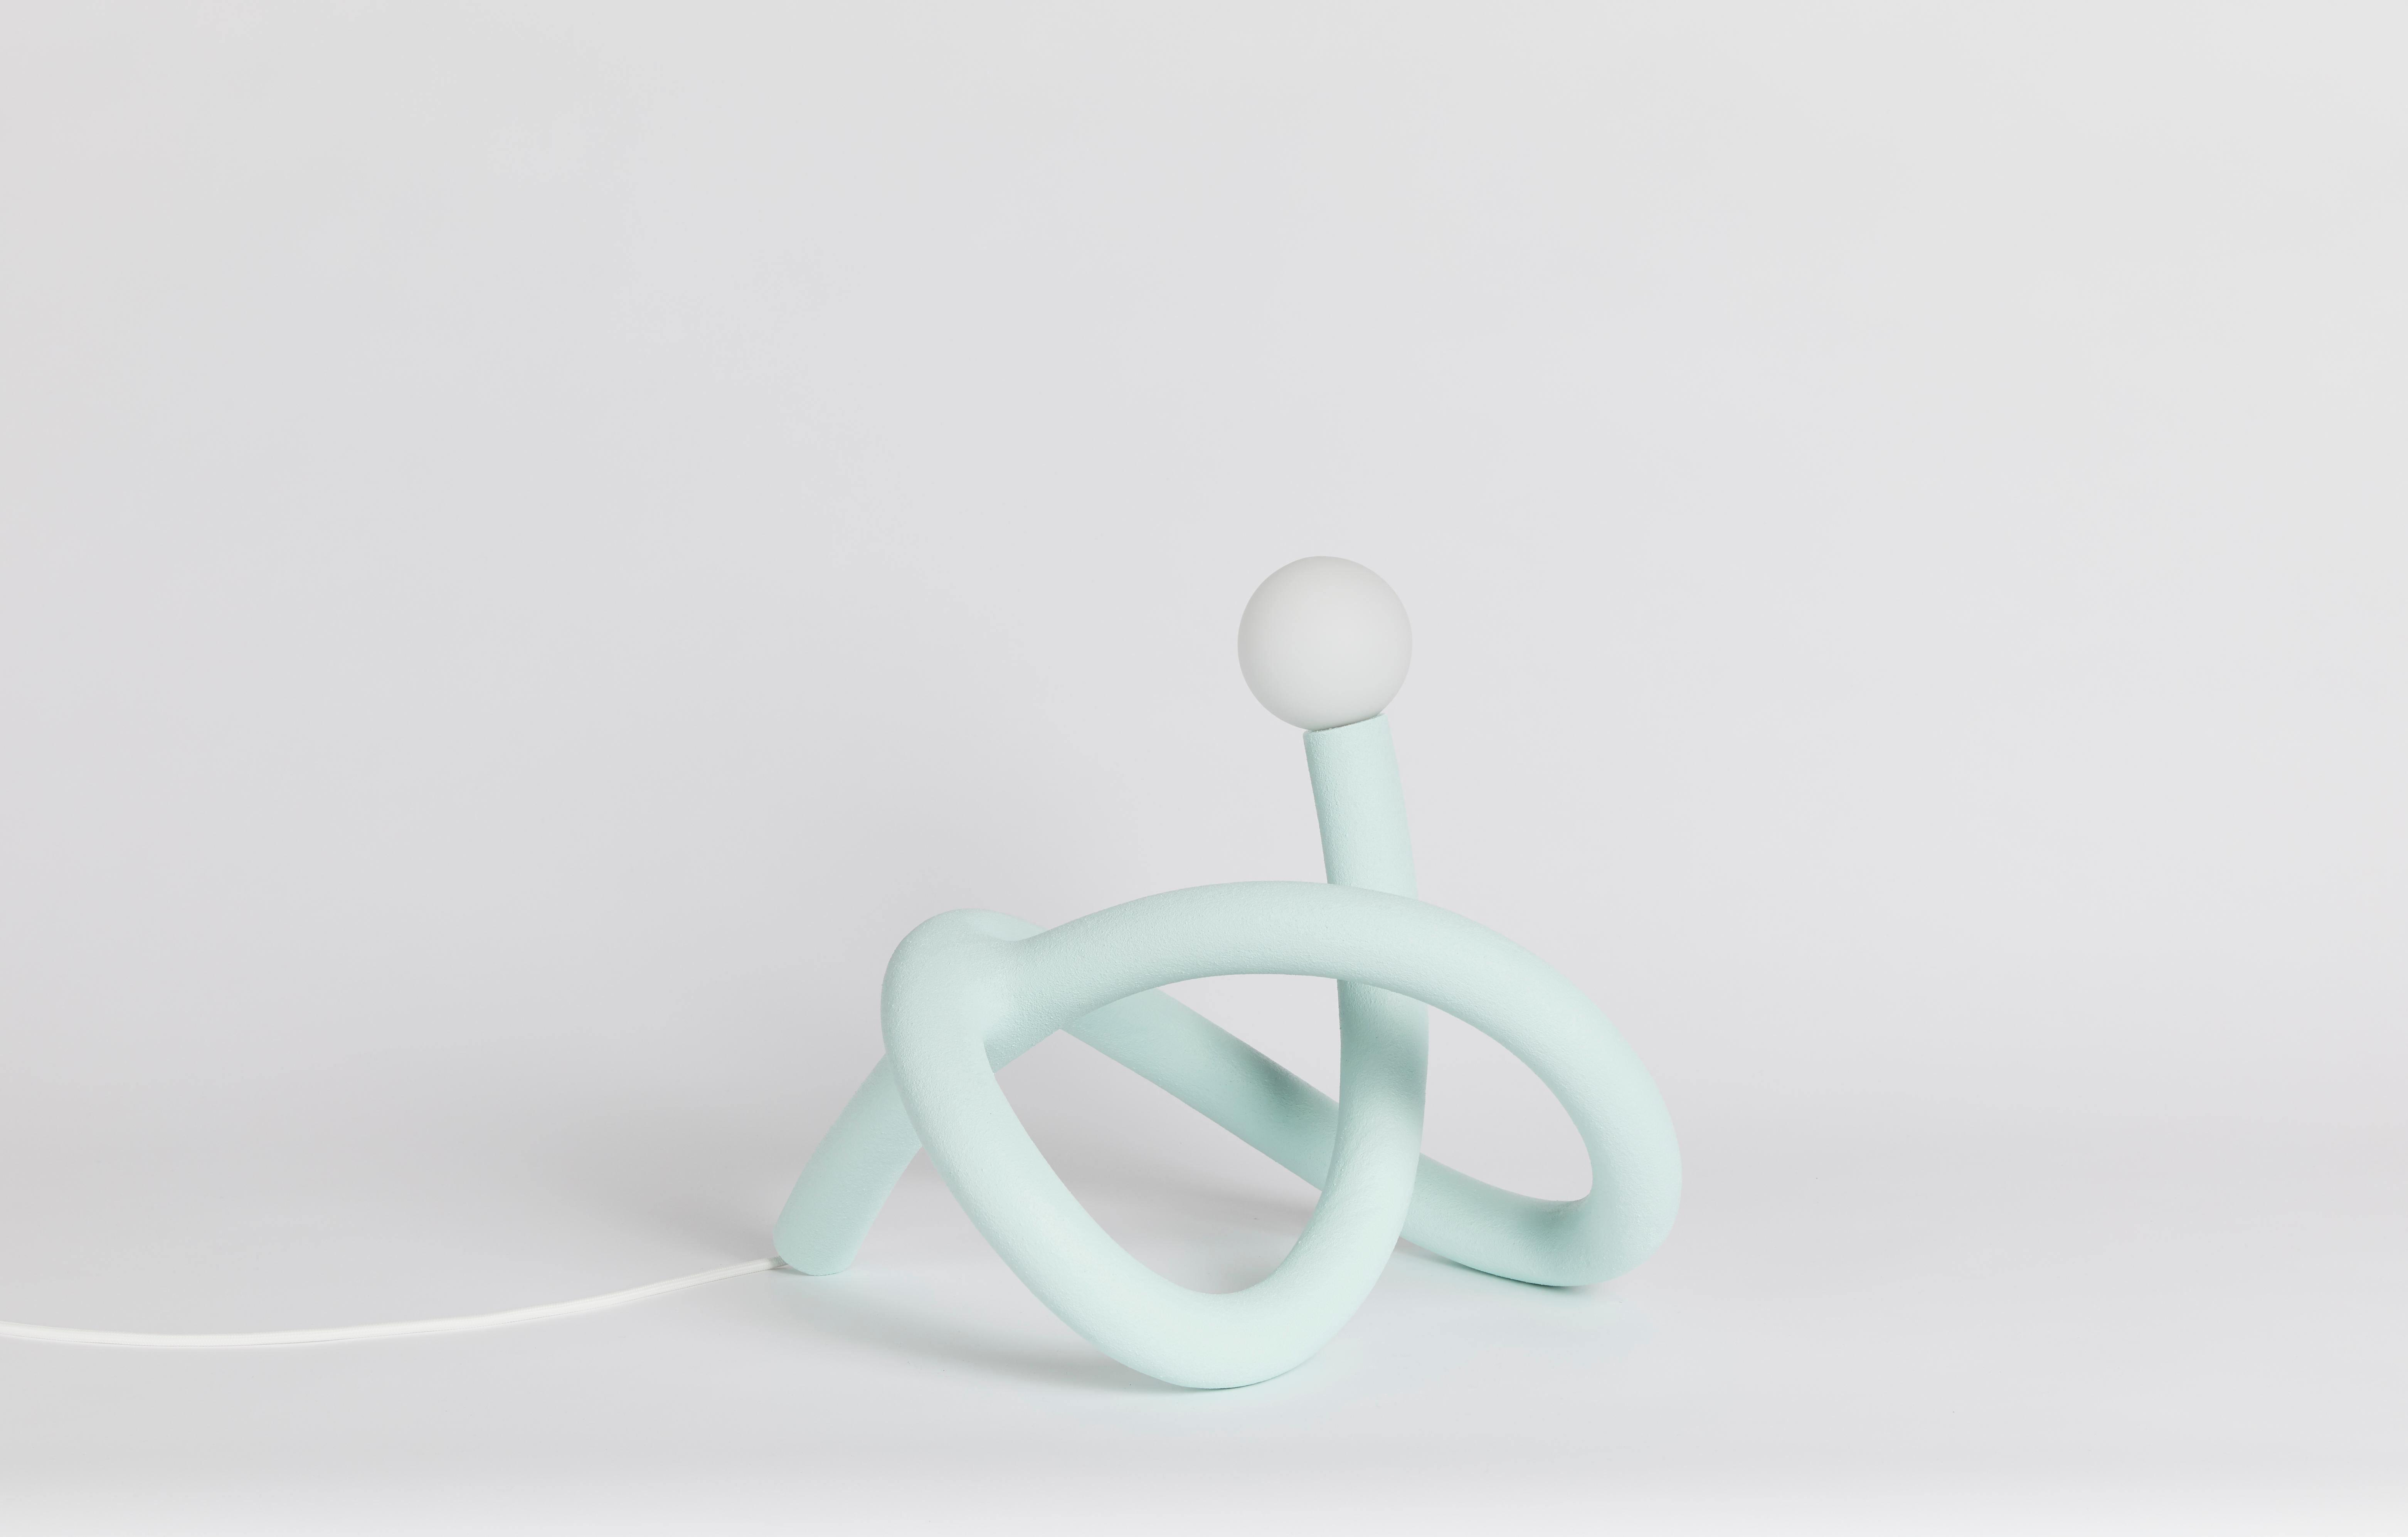 Random desk light by HWE
Limited Edition
Materials: Waste SLS 3D nylon powder, sand from sustainable sources
Dimensions: W 33 x L 47 x  H 34 cm 
Colour: aqua
Also available in: lemon, cream, anthracite, grey, pink

All our lamps can be wired